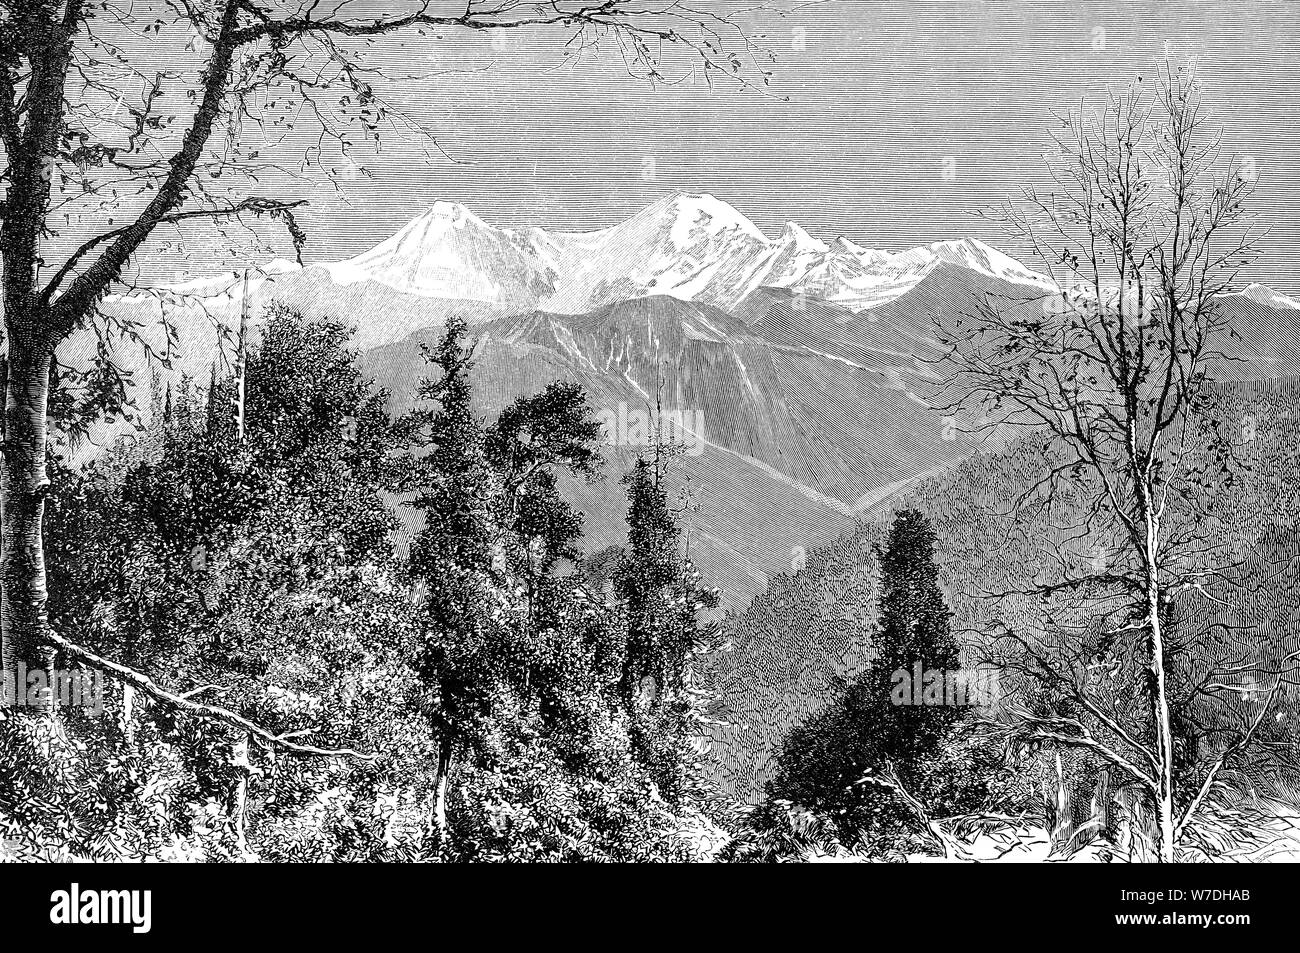 Le montagne Banderpunch, India, 1895.Artista: Charles Barbant Foto Stock